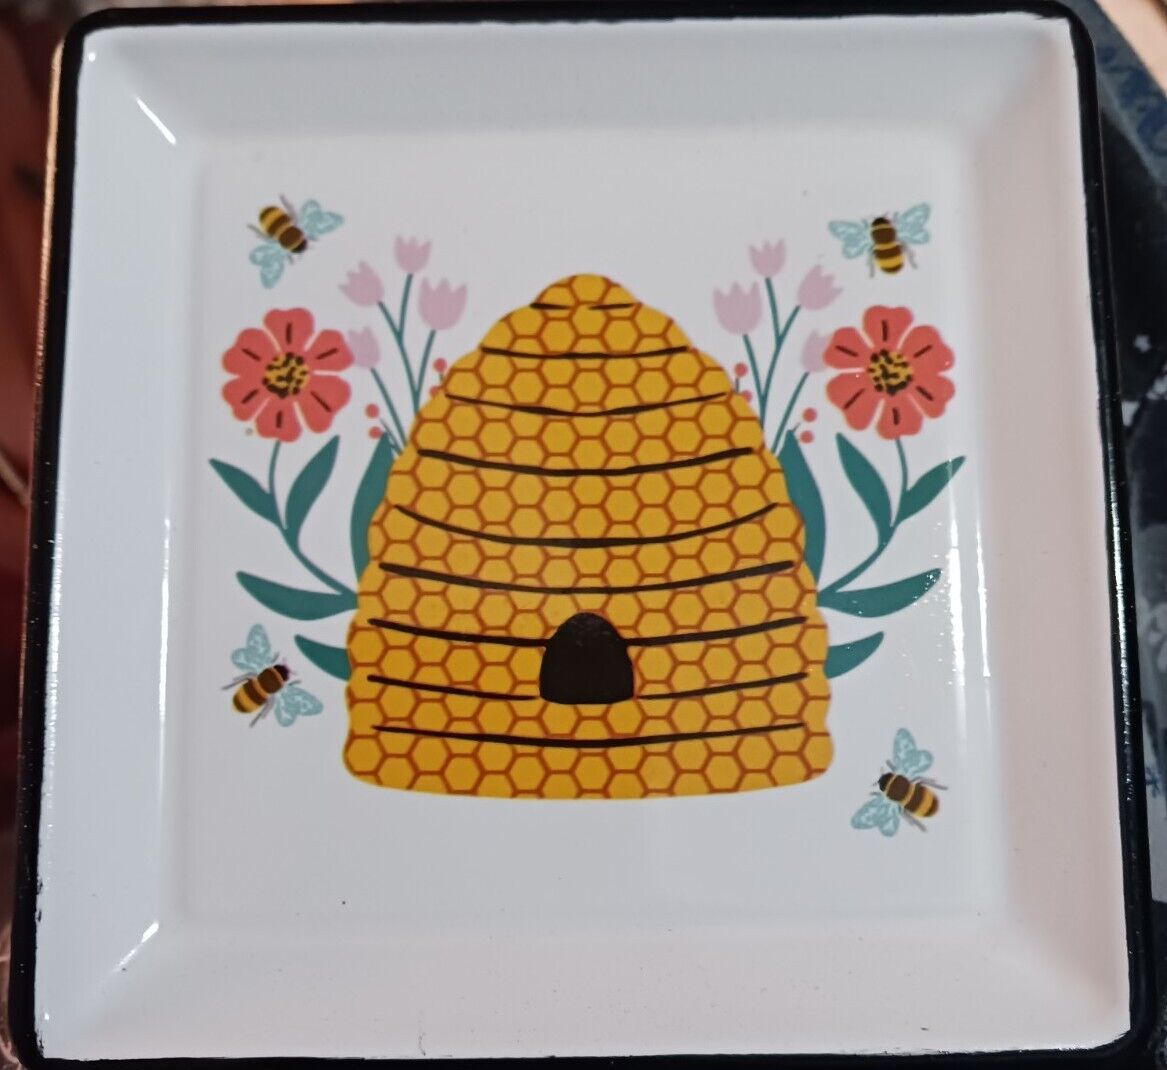 Honey Bee Themed Metal Trinket Dish 5 X 5 CBK Inspired Home by NEW With Tags - $14.85